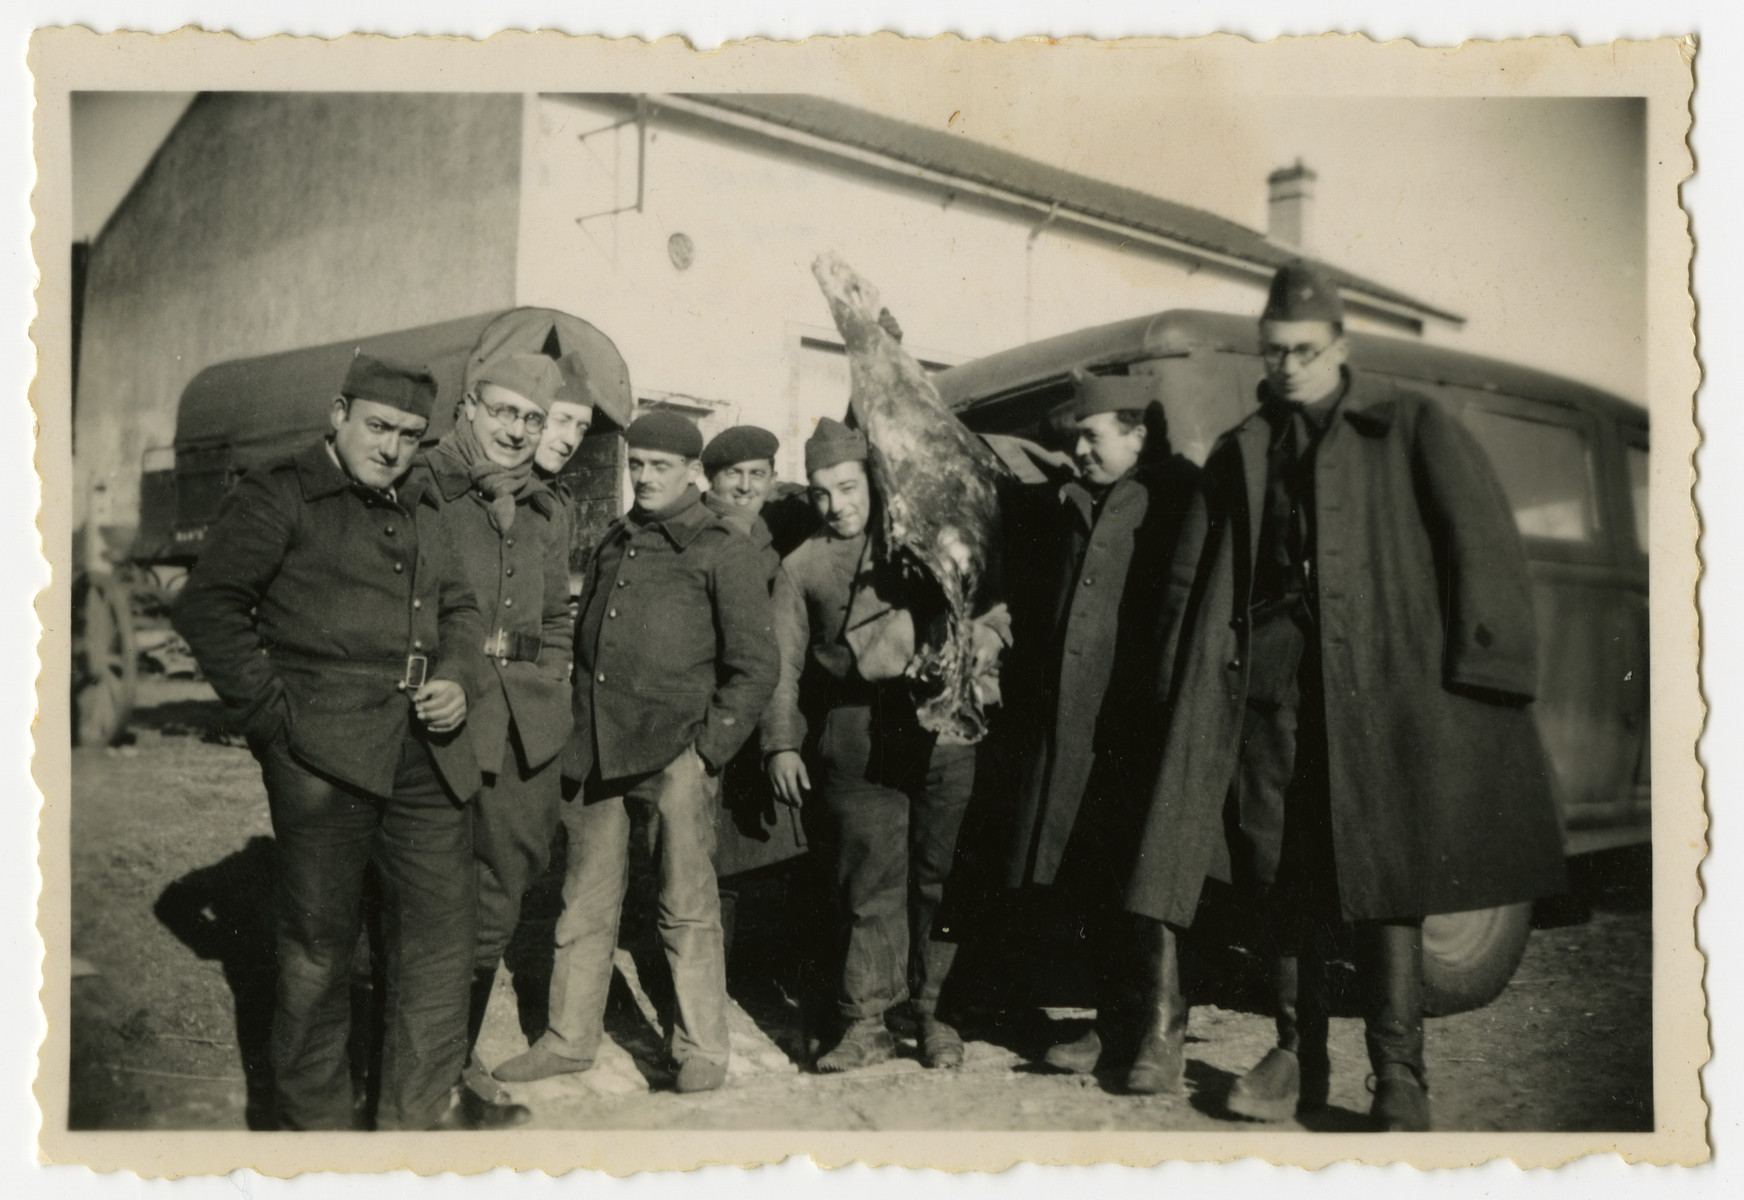 Group portrait of French soldiers.

Included are Alexander Markon, a Jewish immigrant from Lithuania.  One of the soldiers is holding an animal carcass